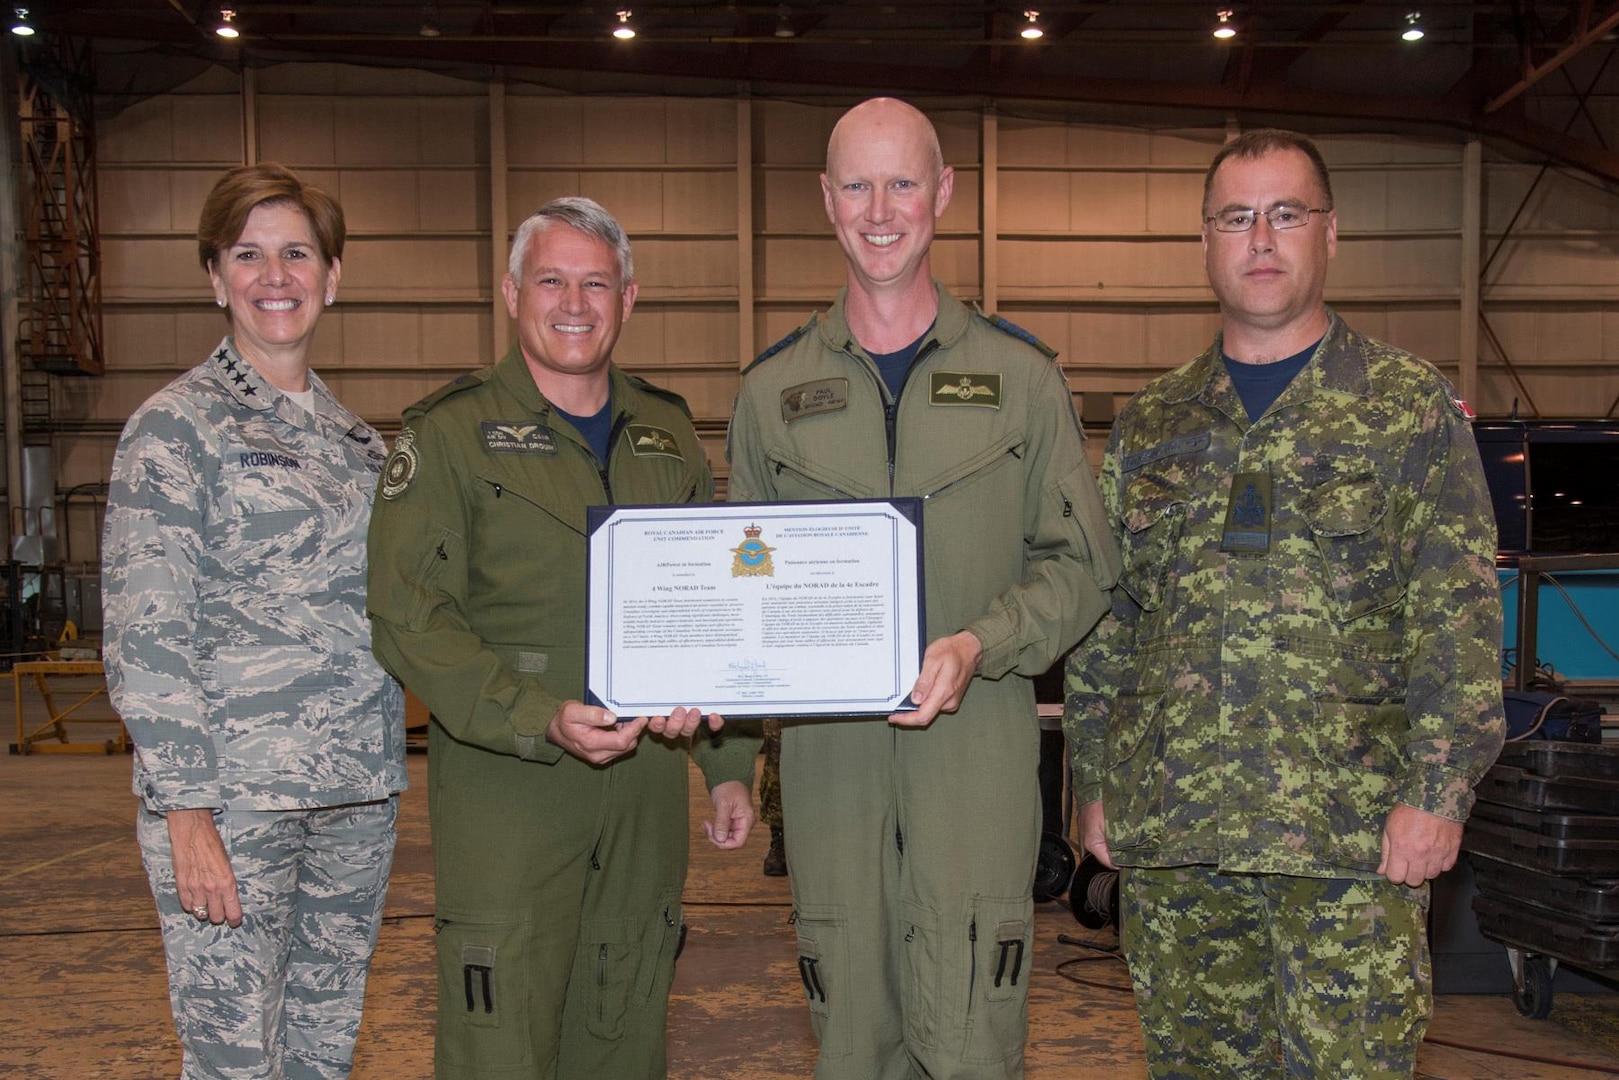 Major-General Christian Drouin, Commander of 1 Canadian Air Division, and General Lori Robinson, Commander of the North American Aerospace Defense Command and U.S. Northern Command,  presents a NORAD commendation to the 4 Wing Base Commander Colonel Paul Doyle and Acting 4 Wing Chief Warrant Officer Robert Brassington, at Hangar 1, 4 Wing Cold Lake, Alberta, Canada, Aug. 15, 2016.